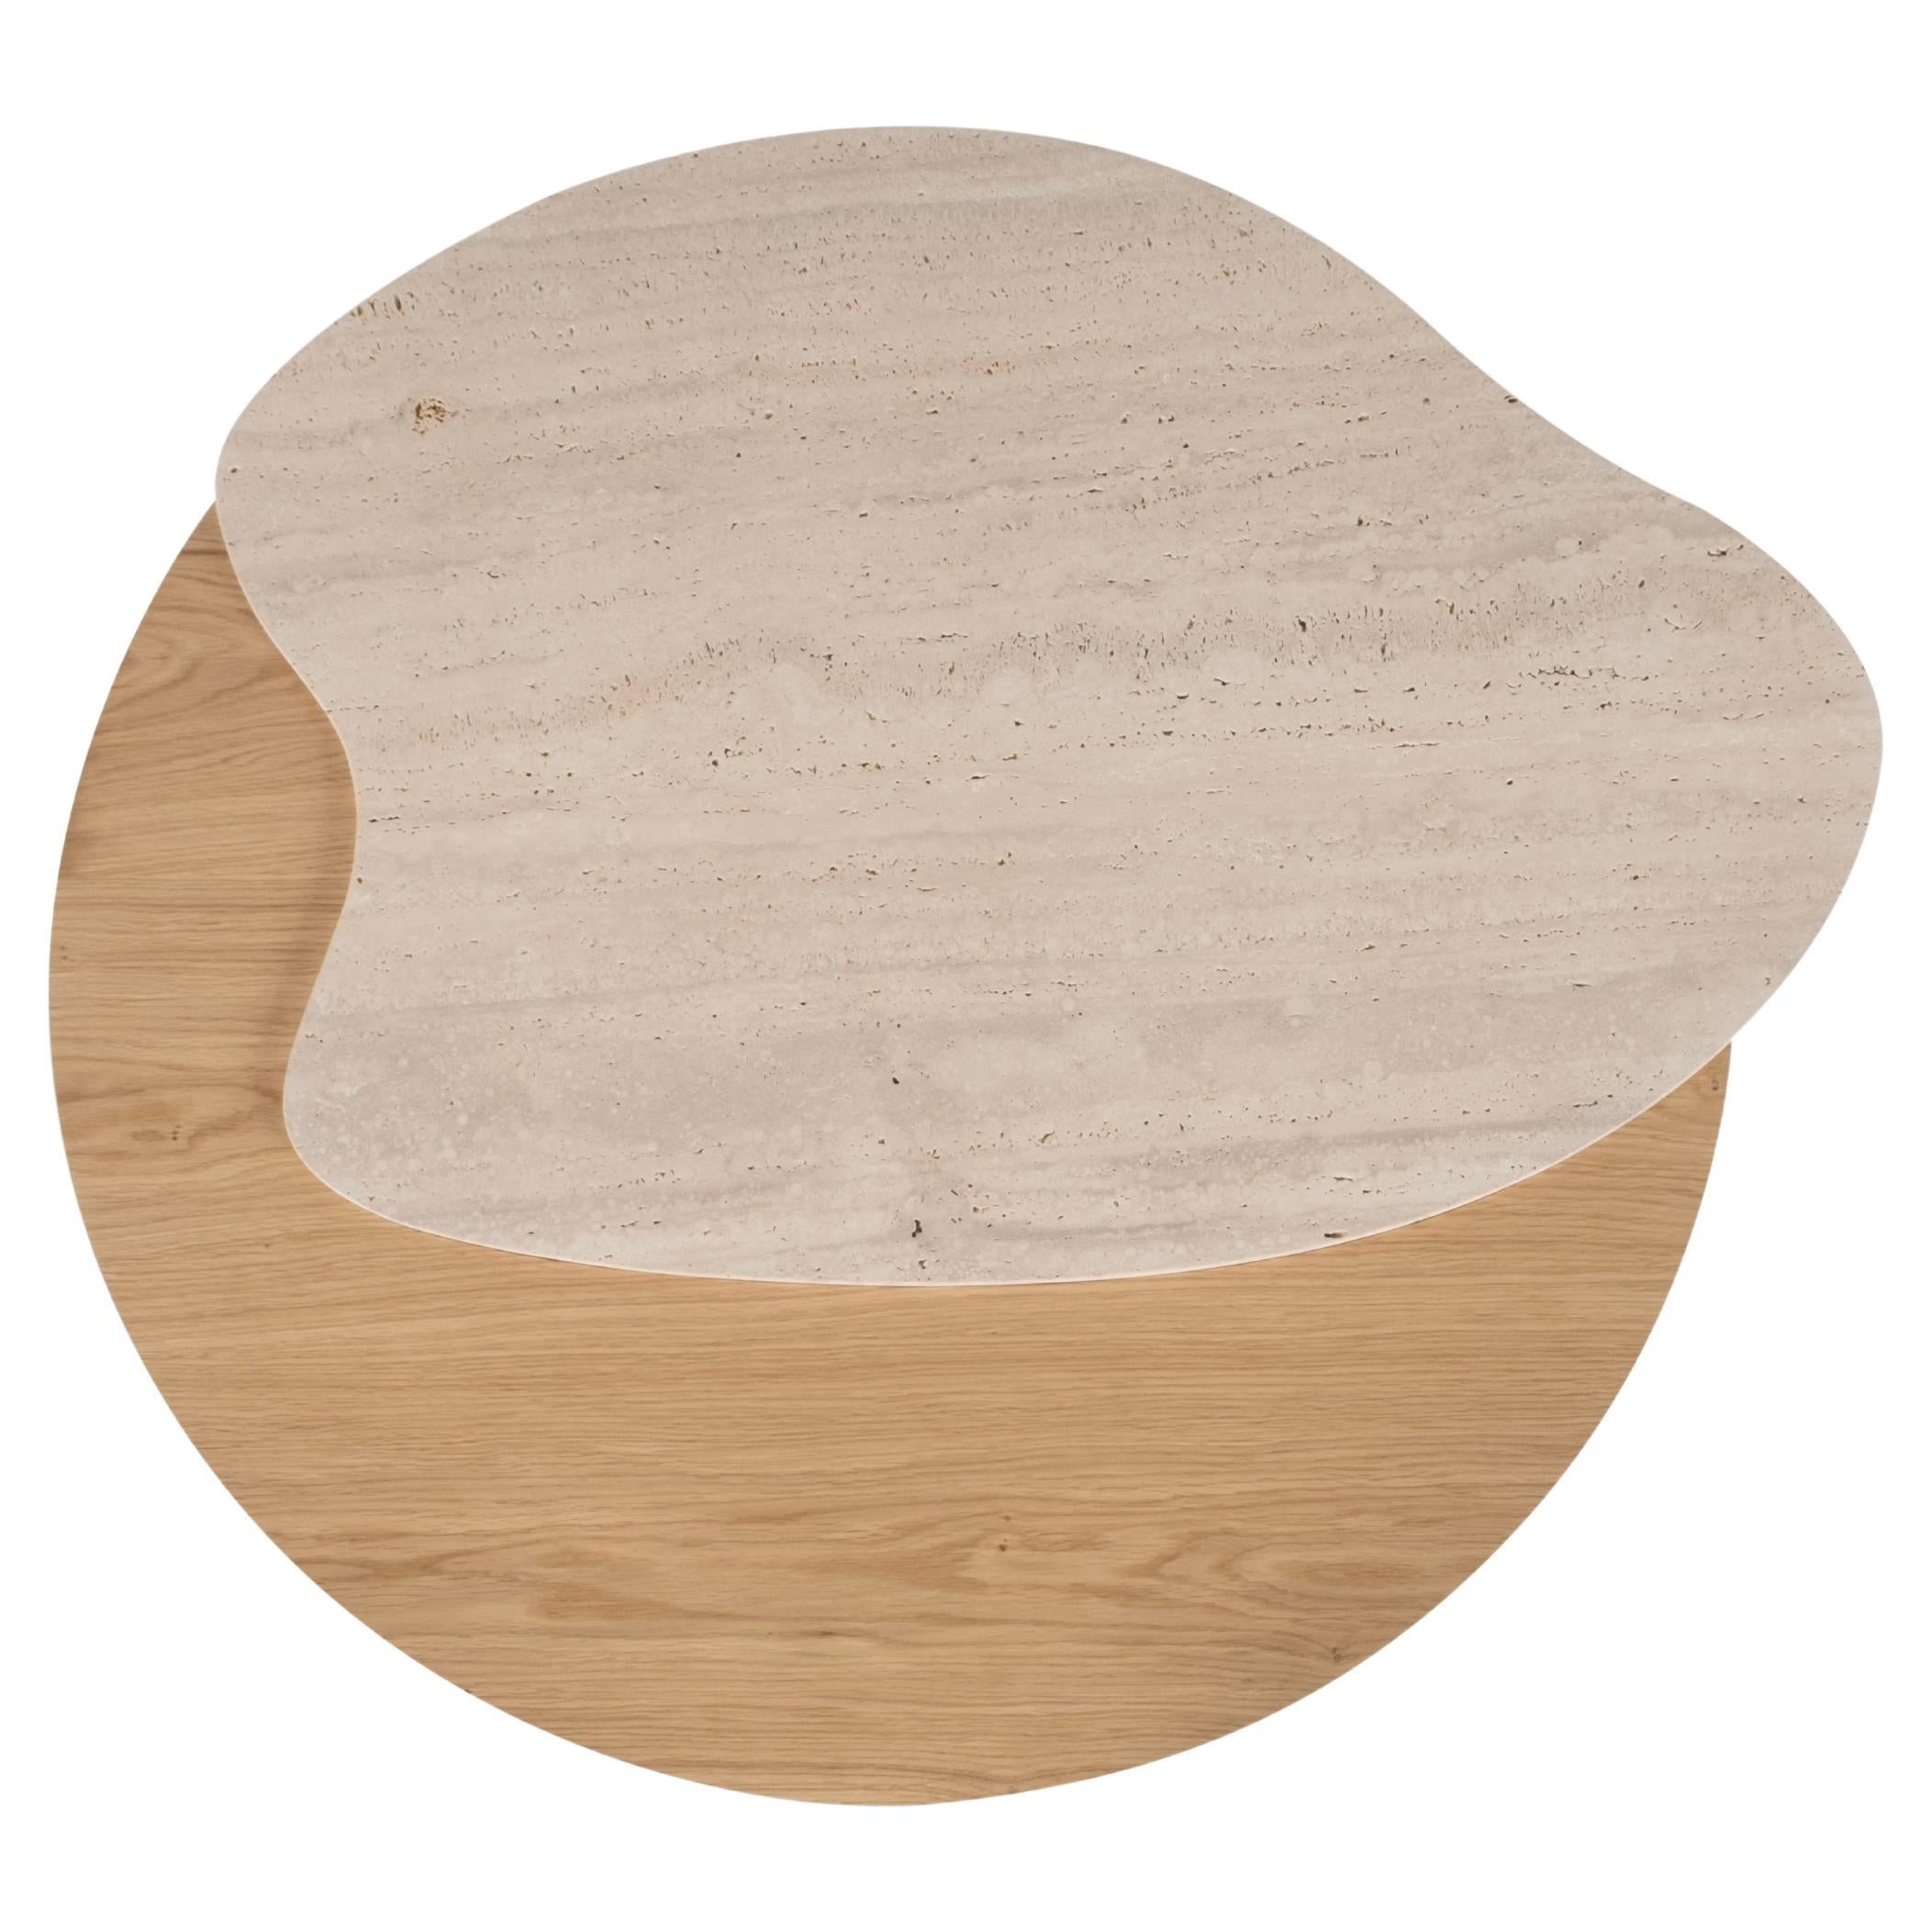 Bordeira coffee table, Contemporary Collection, handcrafted in Portugal - Europe by Greenapple.

Designed by Rute Martins for the Contemporary Collection and inspired by the lines of the beautiful Bordeira beach, this low table adds a representation